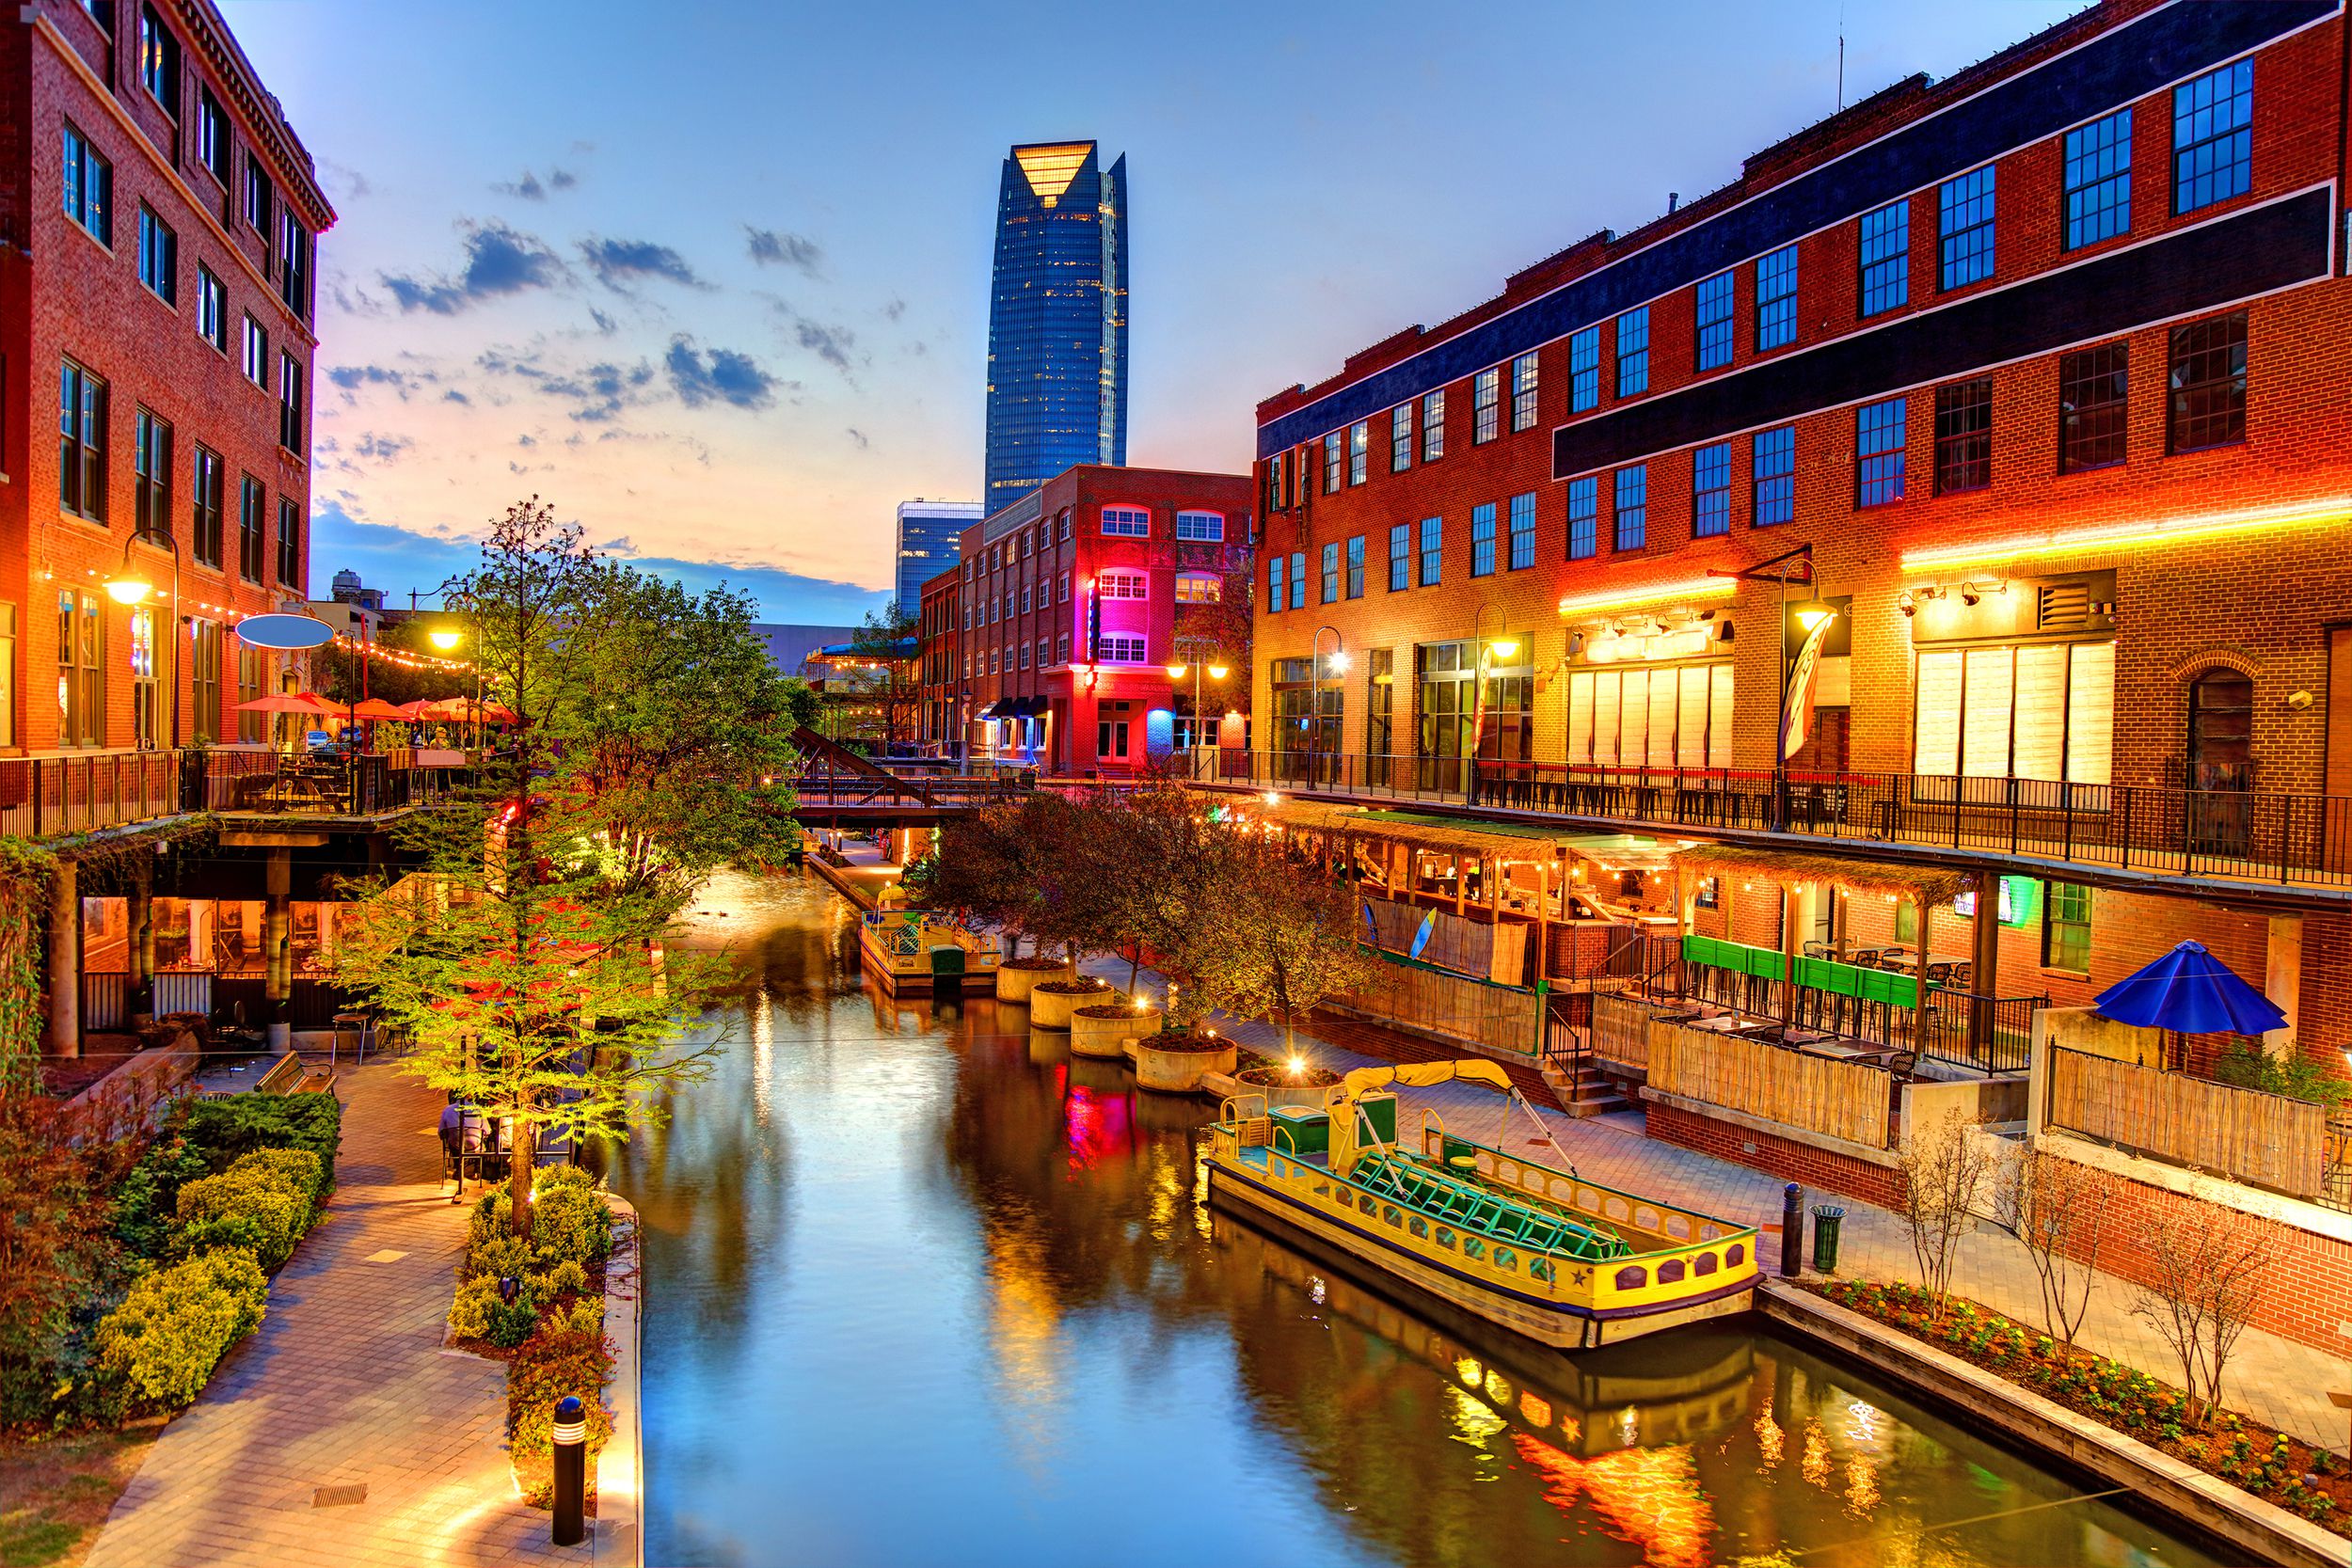 <p>Oklahoma City's lovely Bricktown Entertainment District is full of charm, brightly colored storefronts, and endless selfie appeal. Around the winter holidays, pose with the giant Christmas tree. Or hail a pedicab or horse-drawn carriage and snap away.</p>